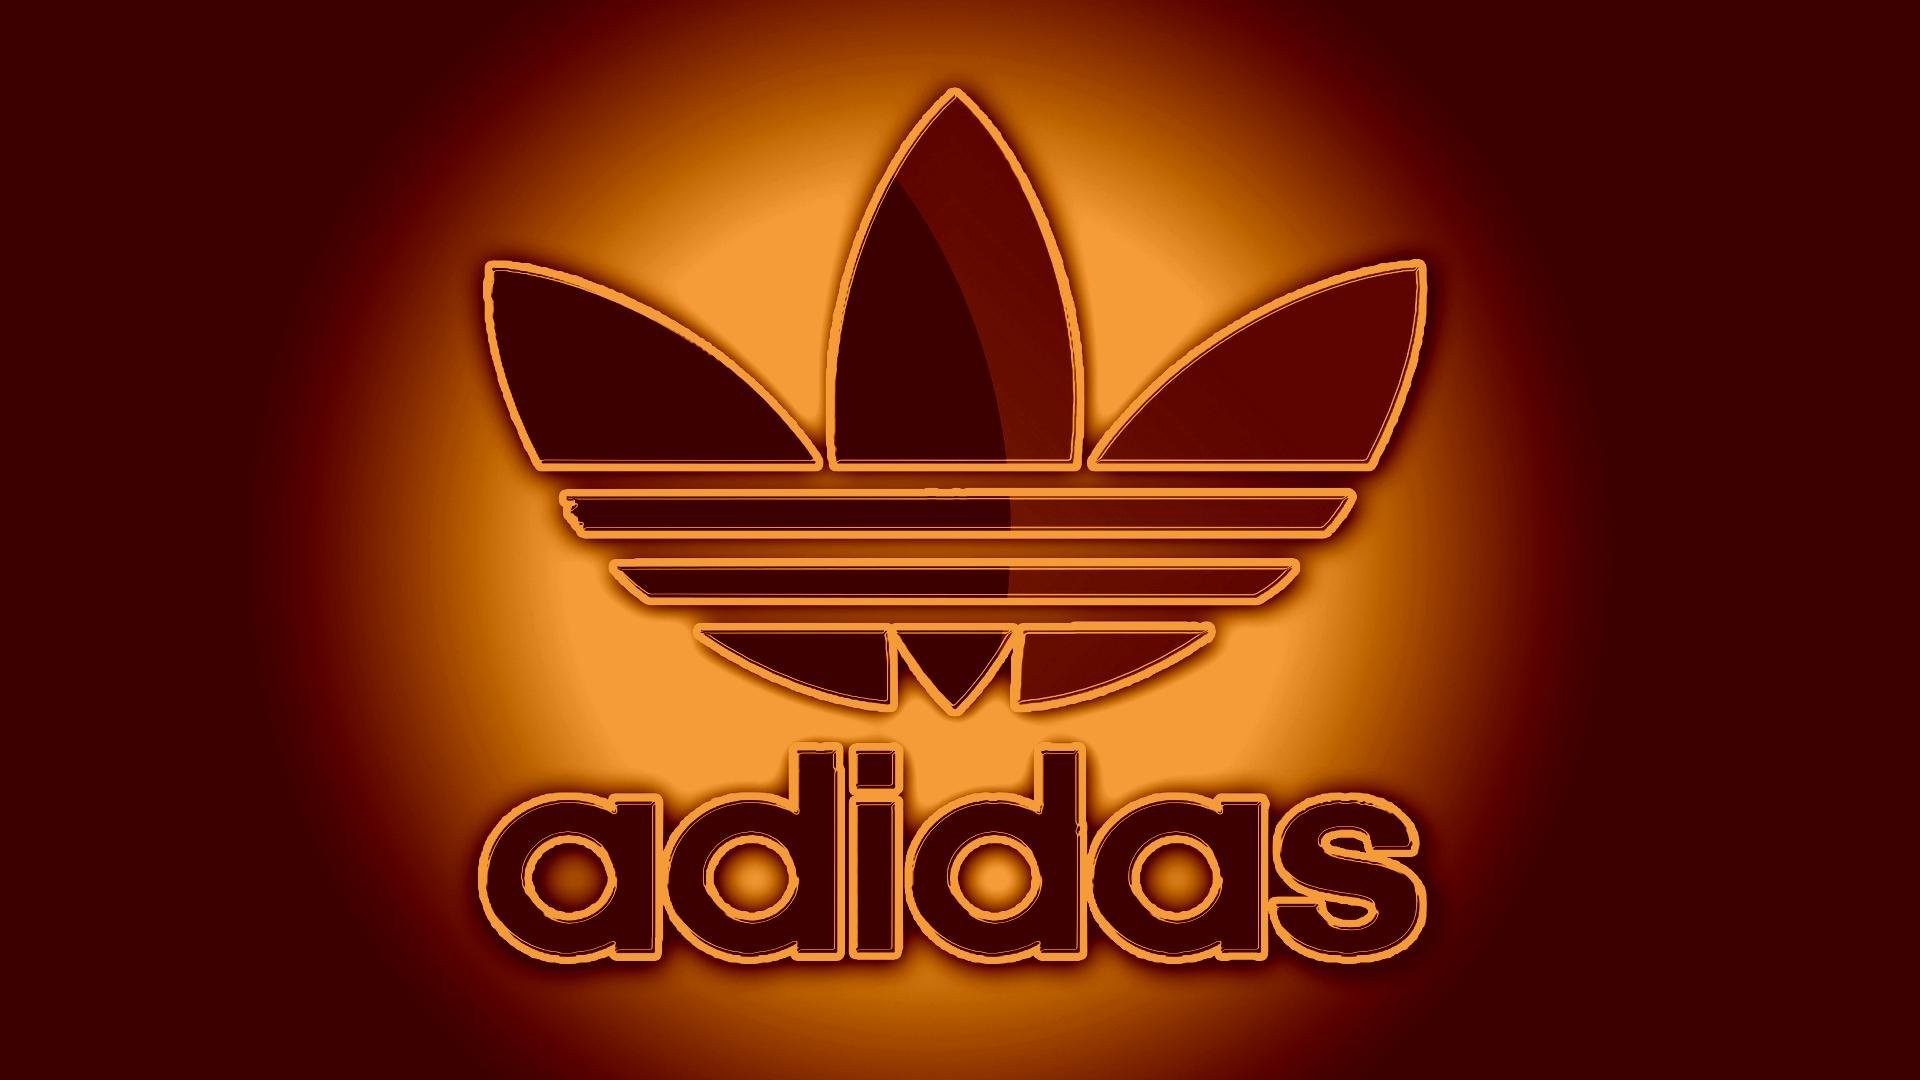 Logo Adidas Wallpaper HD with high-resolution 1920x1080 pixel. You can use this wallpaper for your Desktop Computer Backgrounds, Mac Wallpapers, Android Lock screen or iPhone Screensavers and another smartphone device